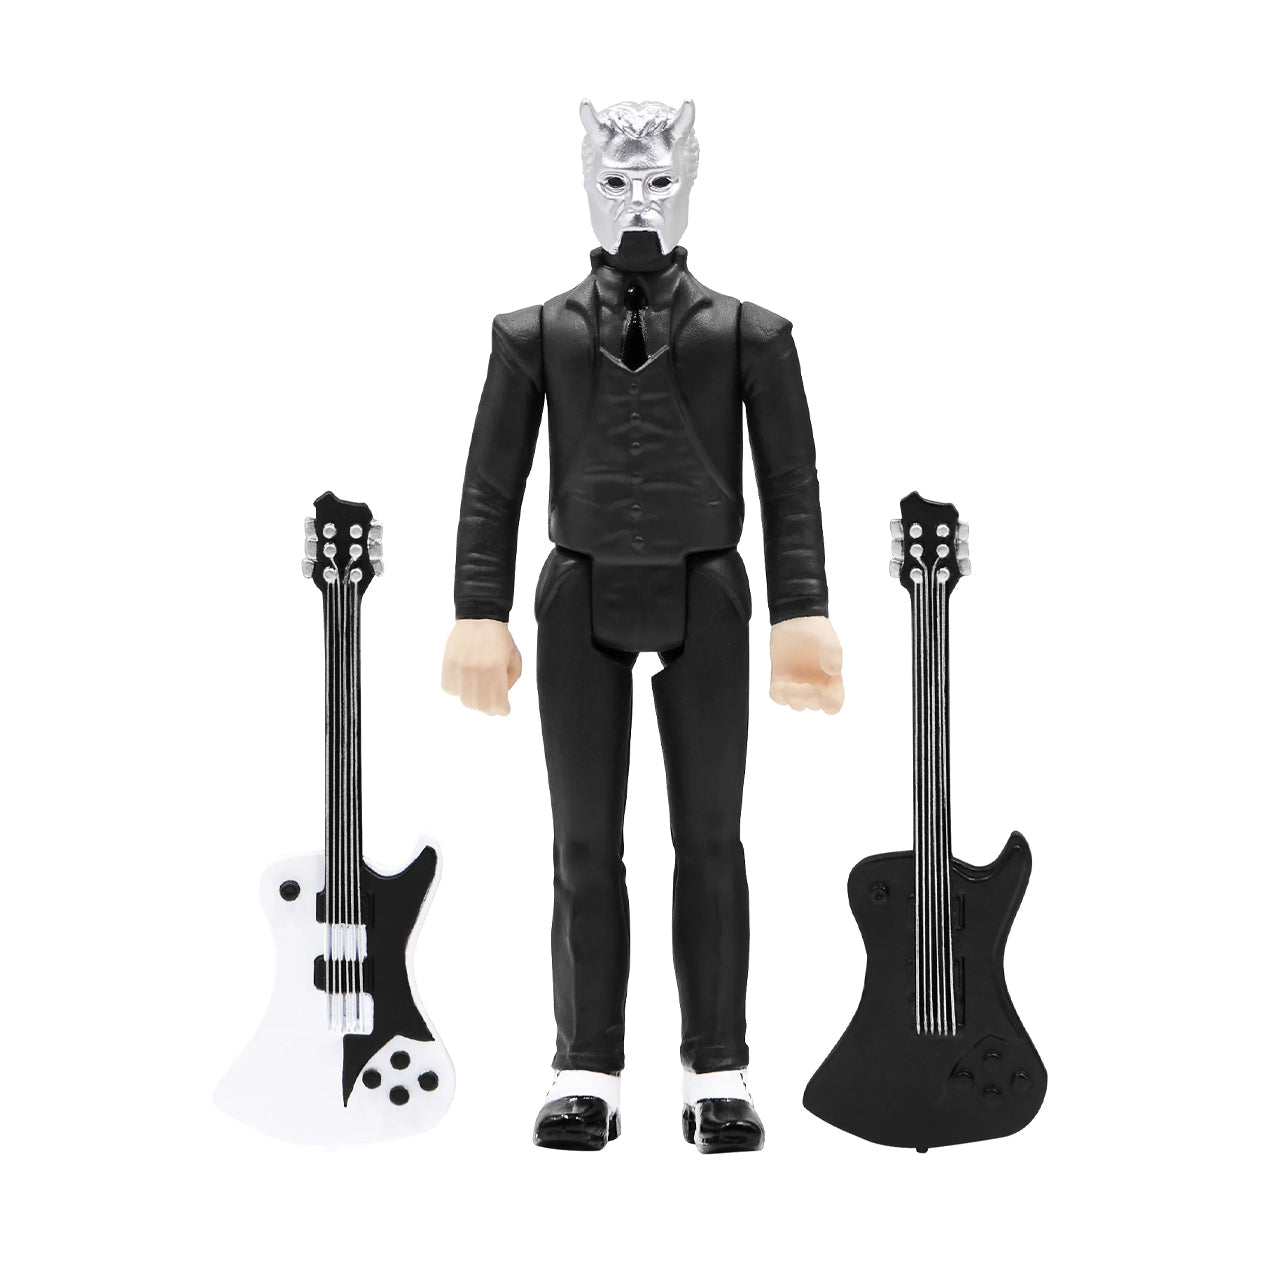 Prequelle Nameless Ghoul (Guitars) ReAction Figure - Ghosts by Super7